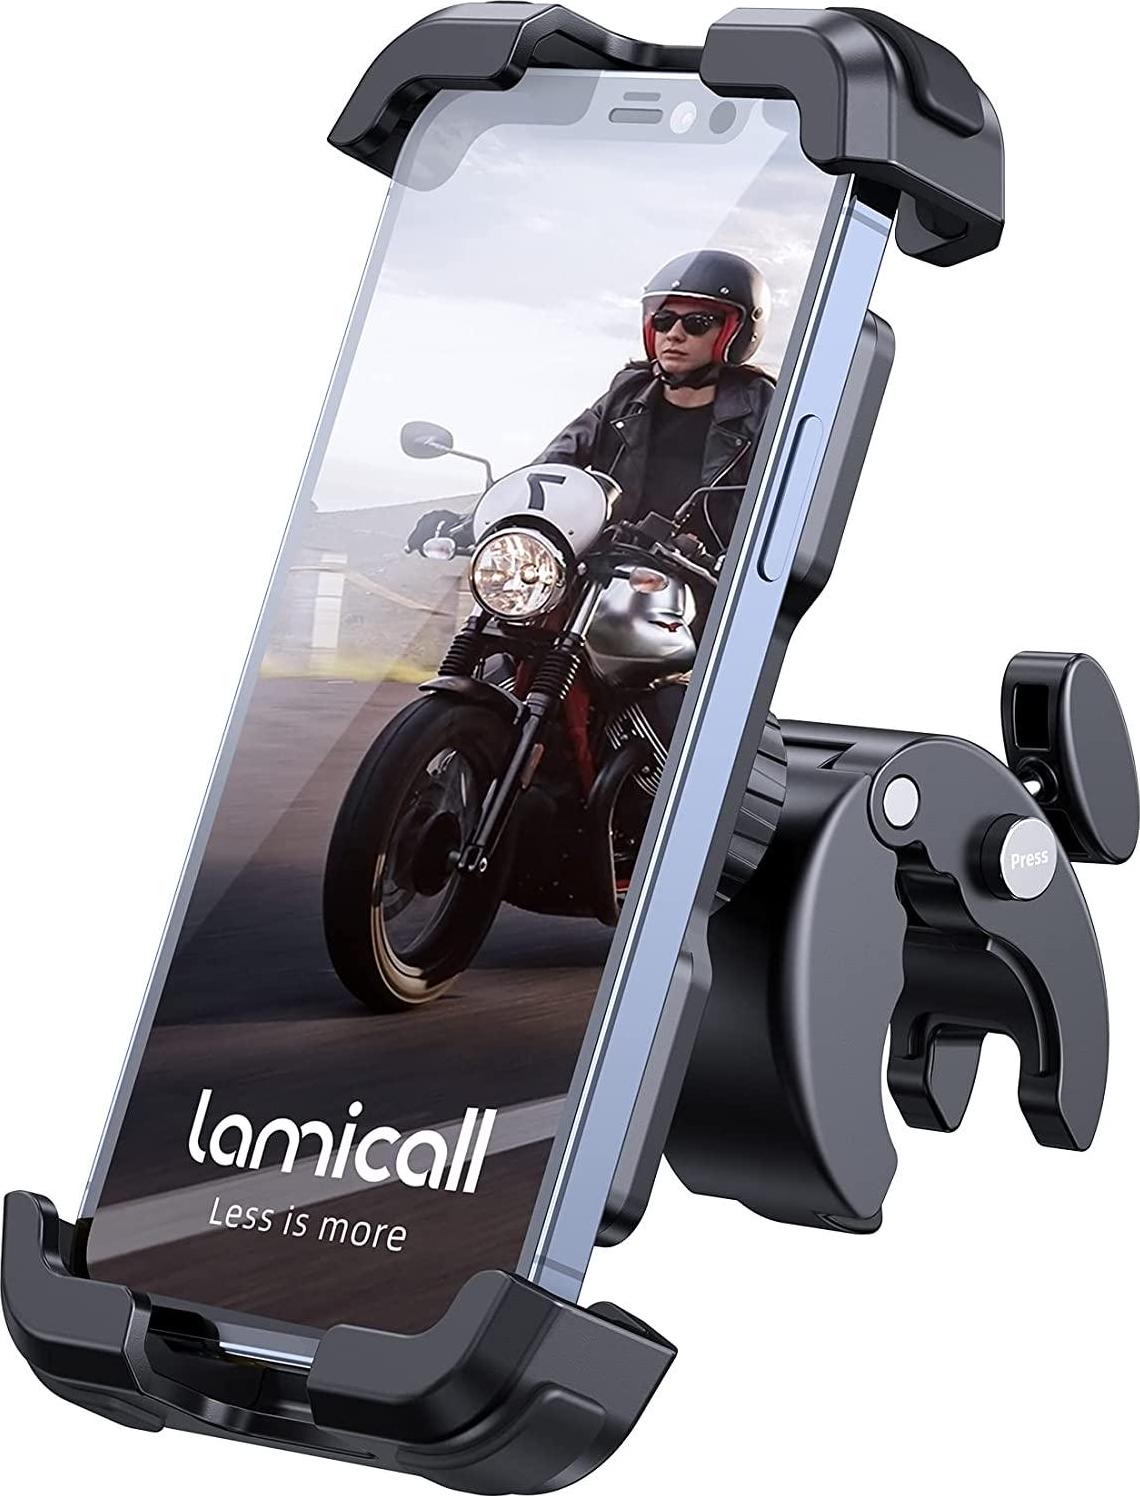 Lamicall, Lamicall Motorcycle Phone Mount, Bike Phone Holder - Upgrade Quick Install Handlebar Clip for Bicycle Scooter, Cell Phone Clamp for iPhone 13/ 12/ 11 Pro Max, Galaxy S10/ S9 and More 4.7 - 6.8 Phone